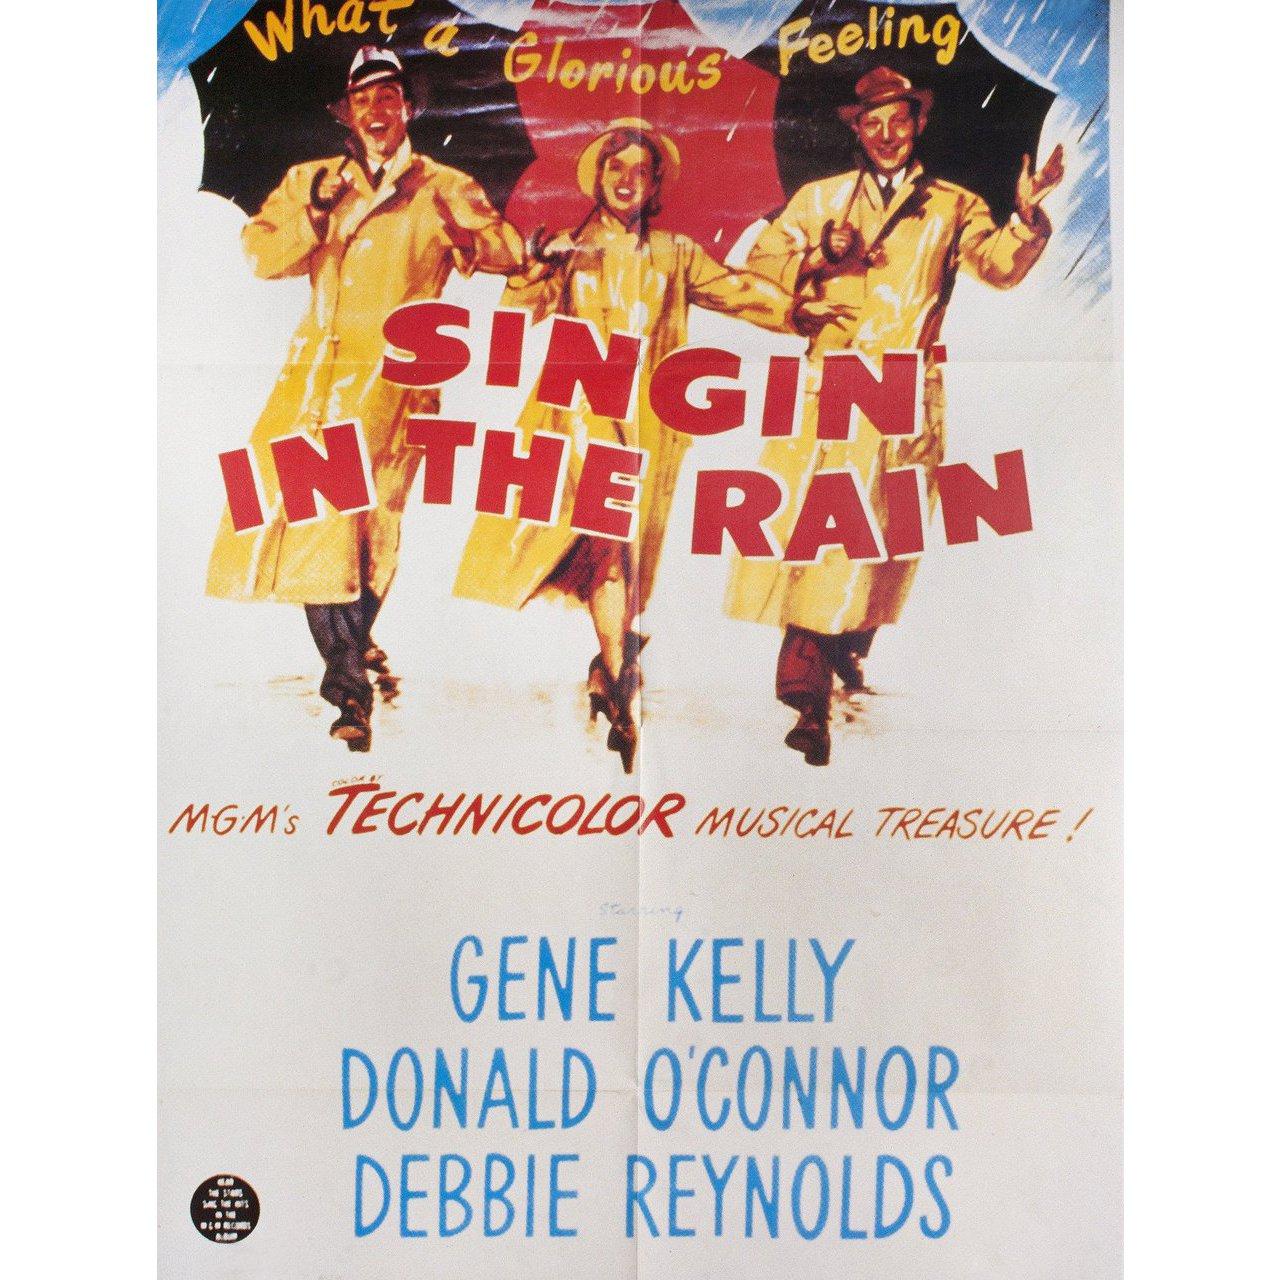 Original 2000s re-release French poster for the 1952 film Singin' in the Rain directed by Stanley Donen / Gene Kelly with Gene Kelly / Donald O'Connor / Debbie Reynolds / Jean Hagen. Fine condition, folded. Many original posters were issued folded